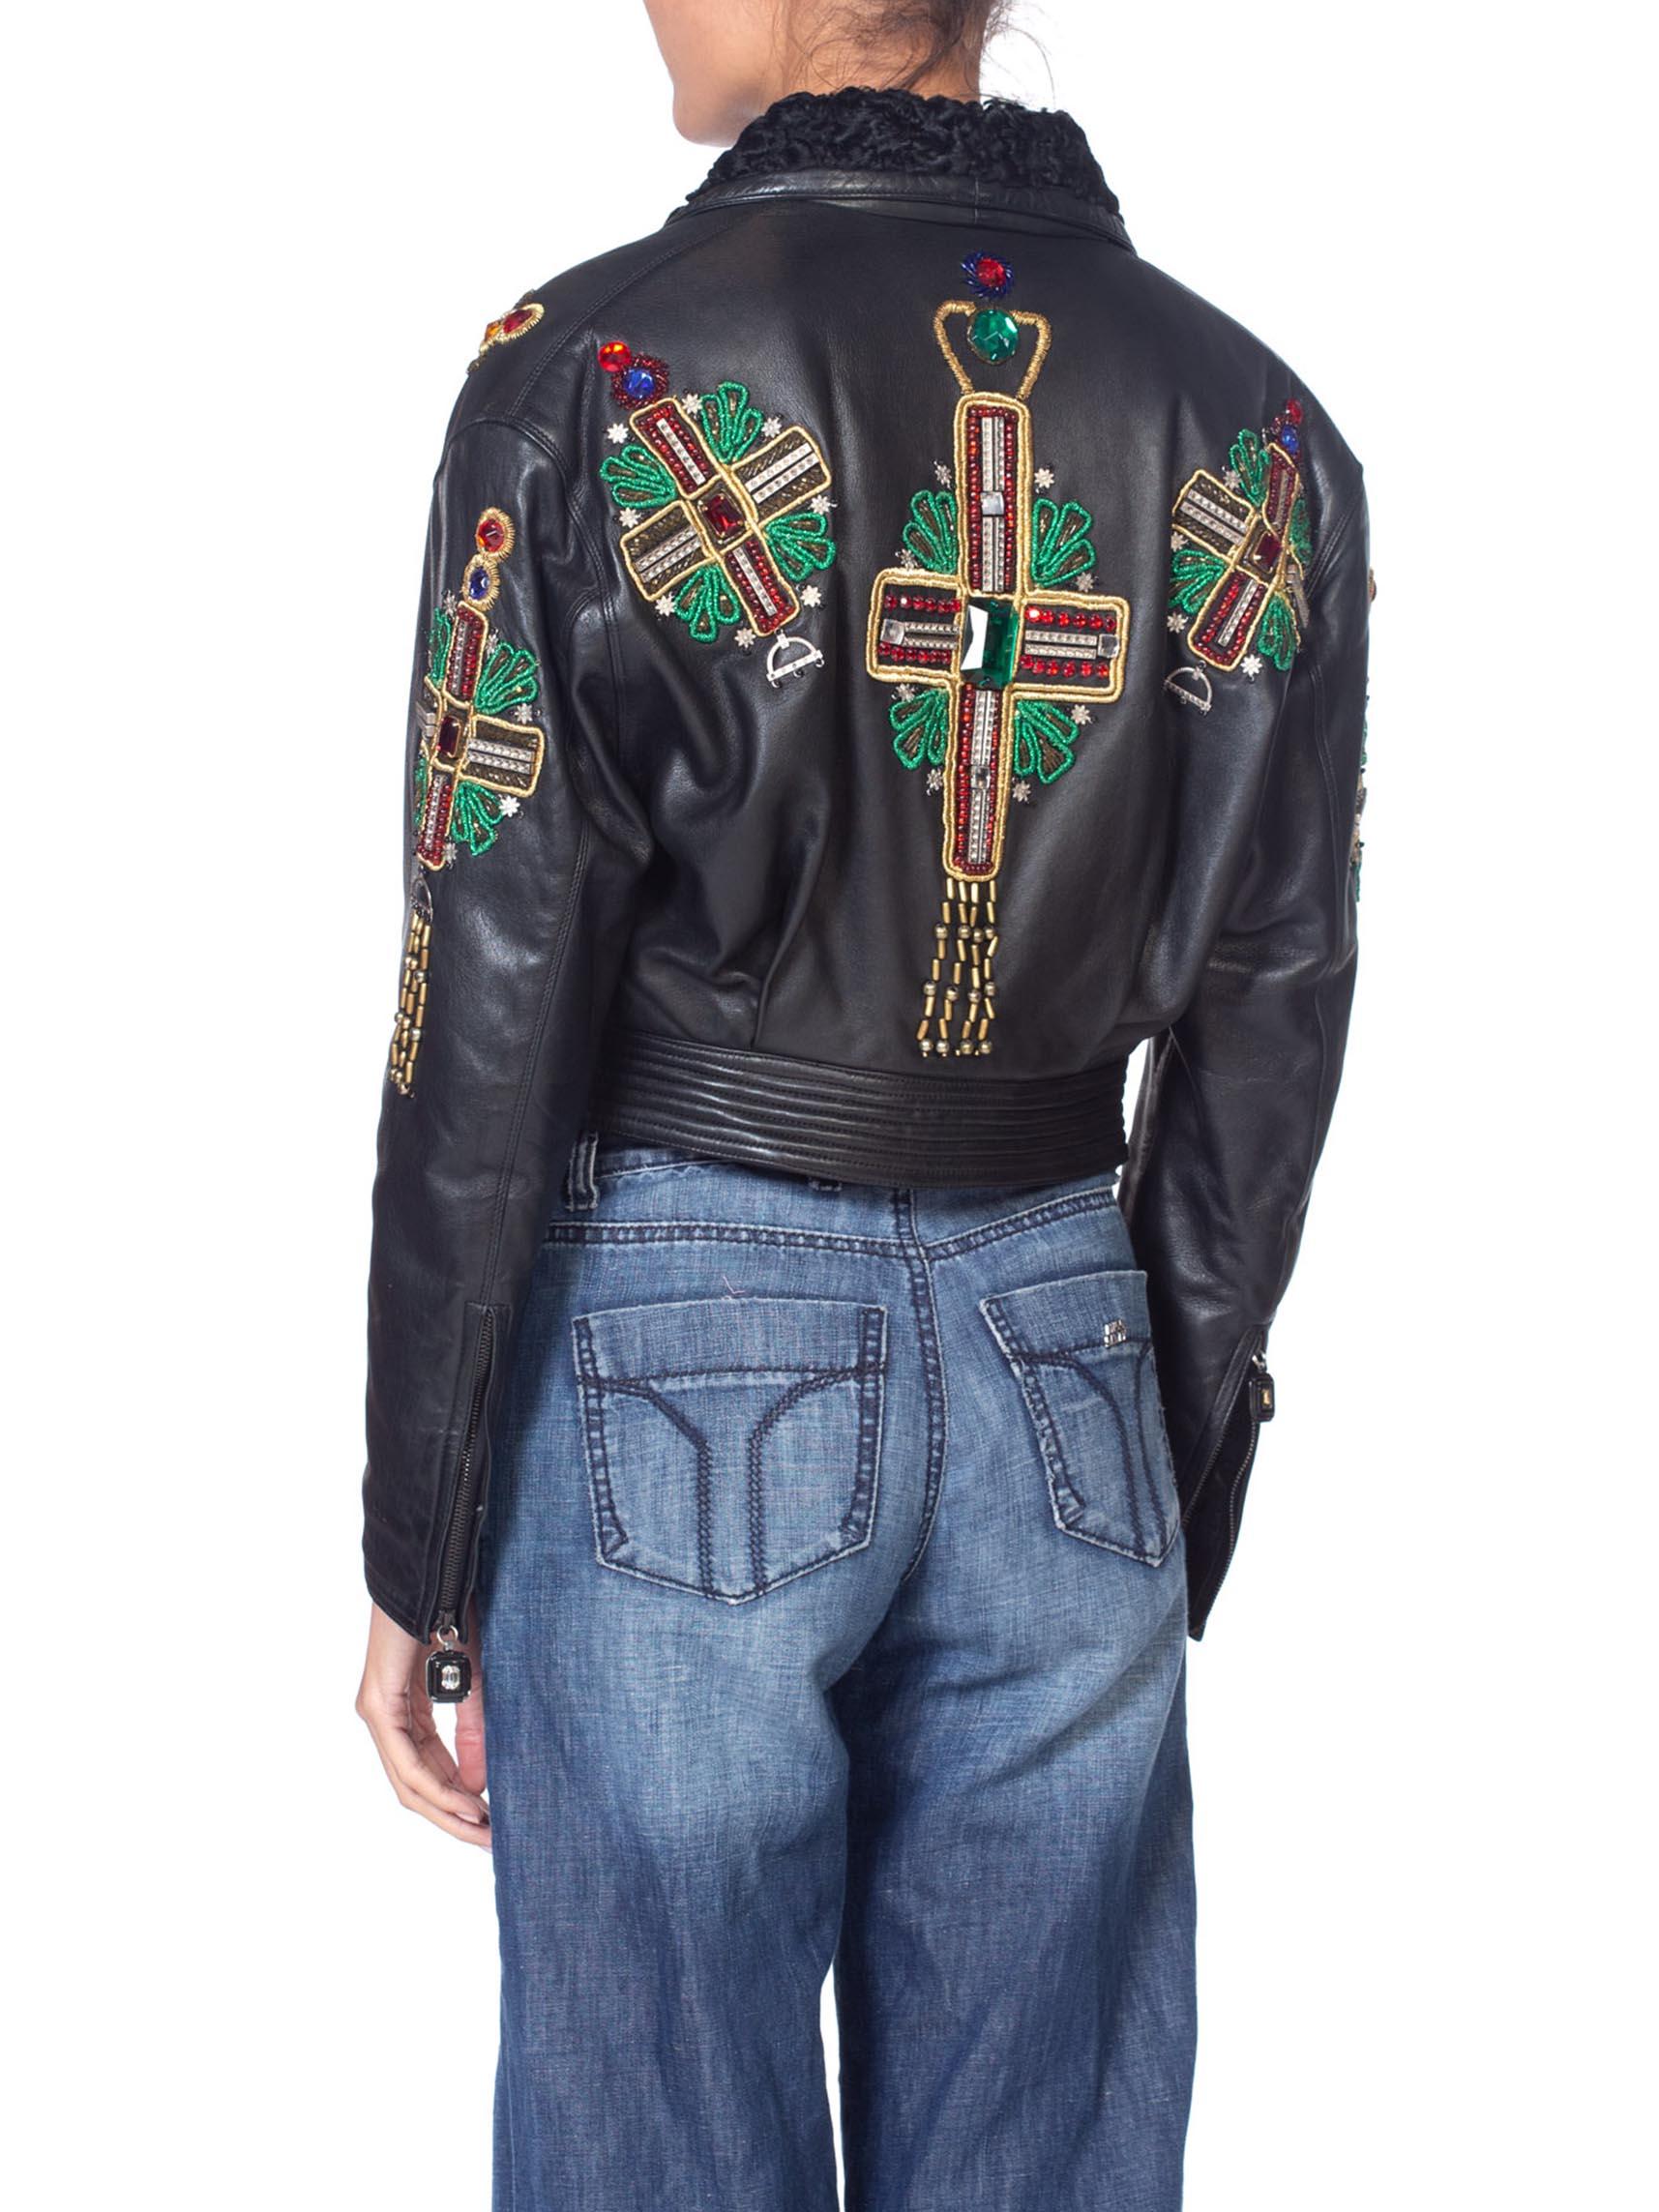 1990'S GIANNI VERSACE Iconic Crystal Cross Beaded Leather Biker Jacket From 1993 2